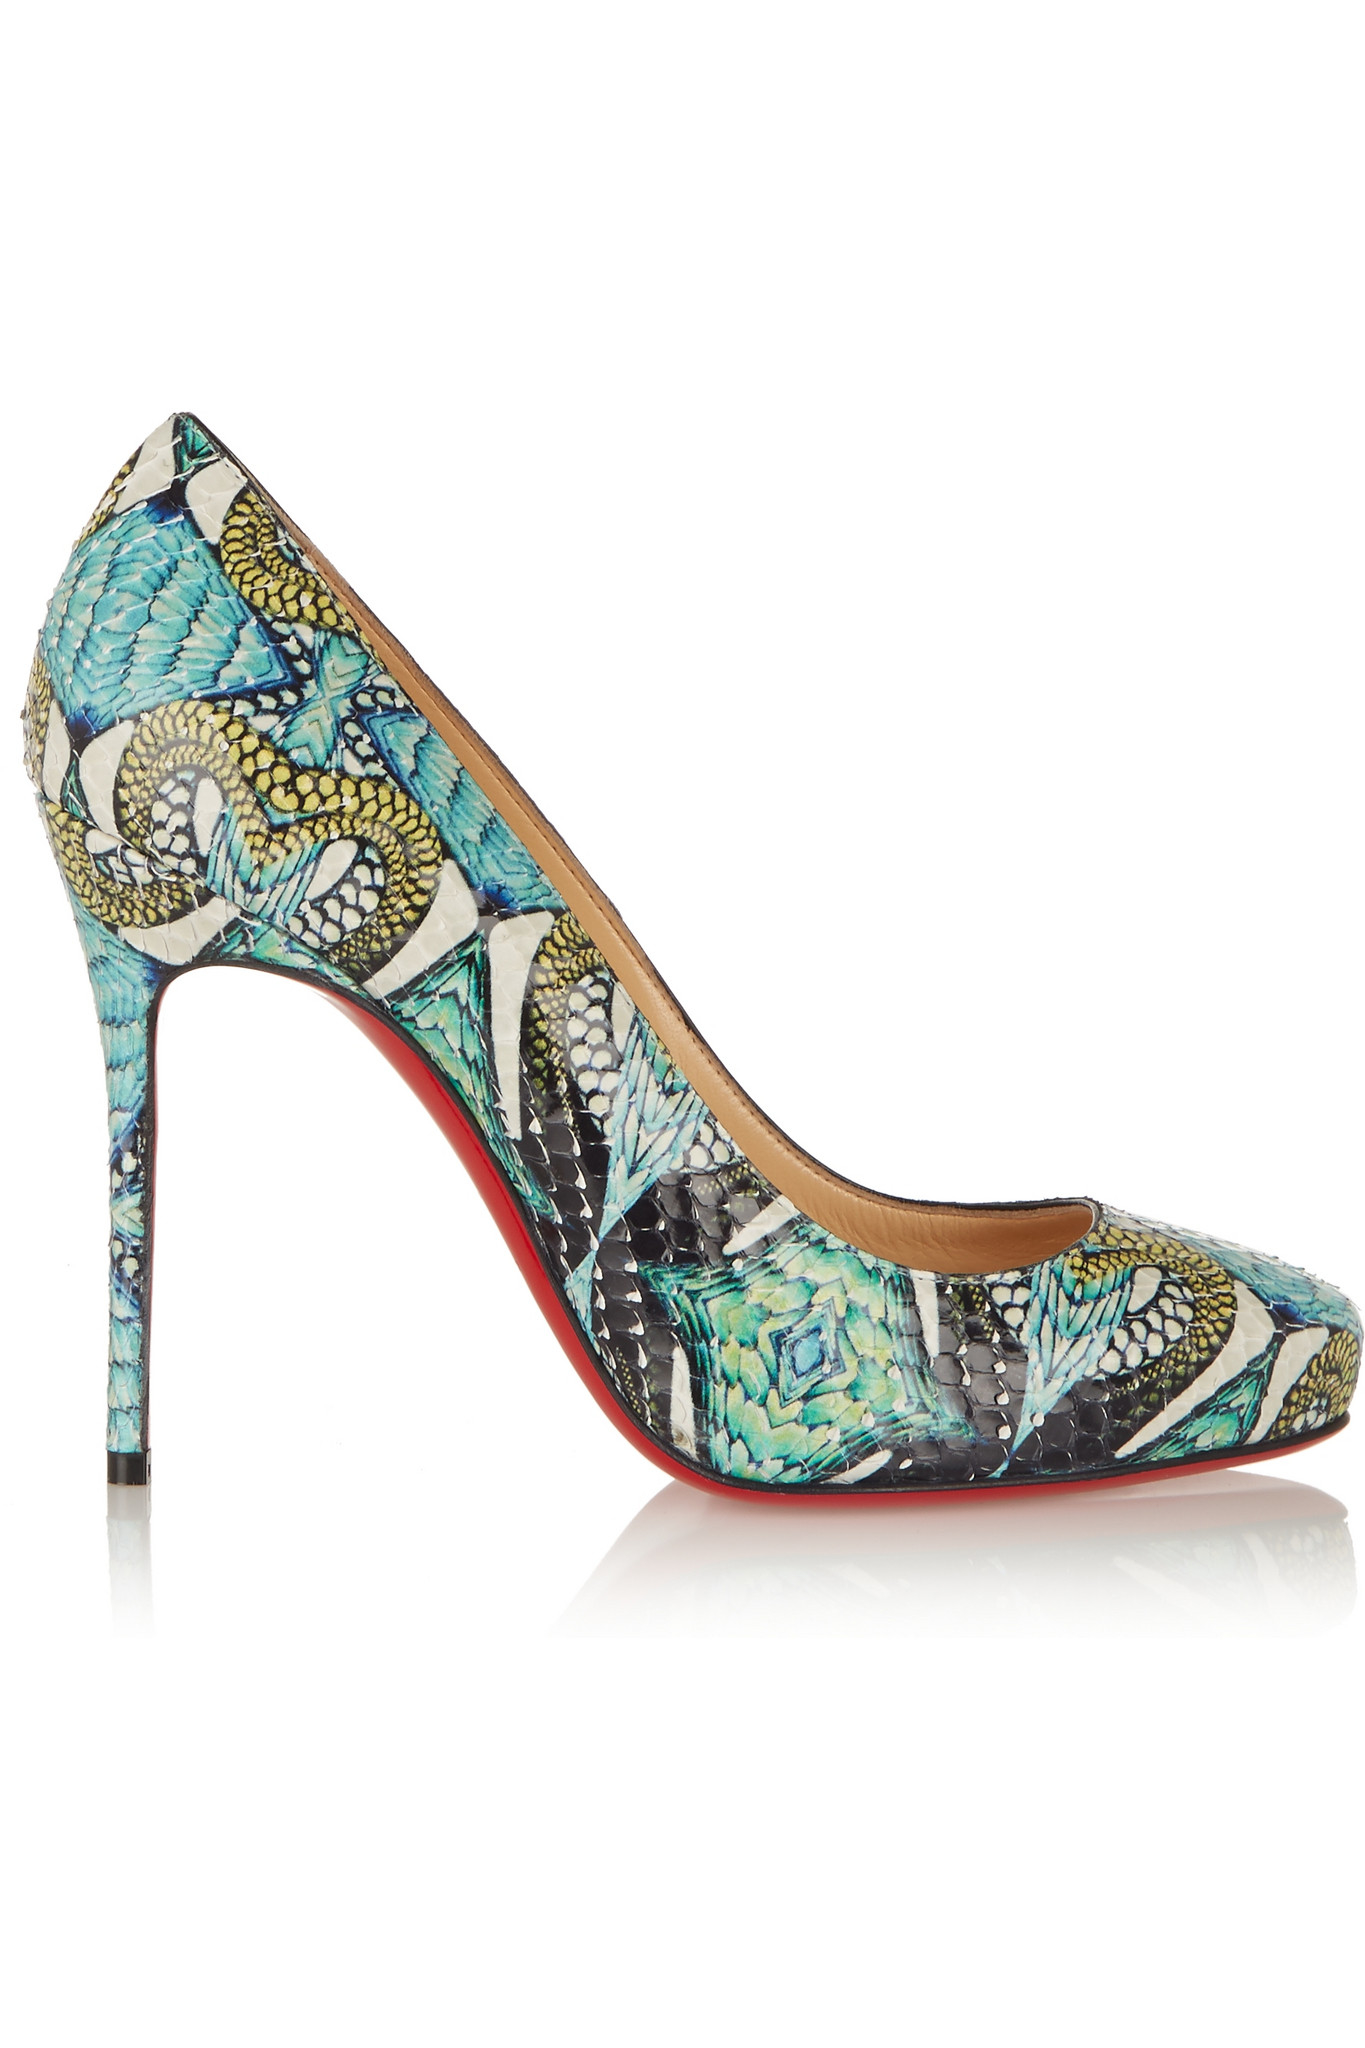 louboutin shoes cost - Christian louboutin Elisa 100 Printed Python Pumps in Blue ...